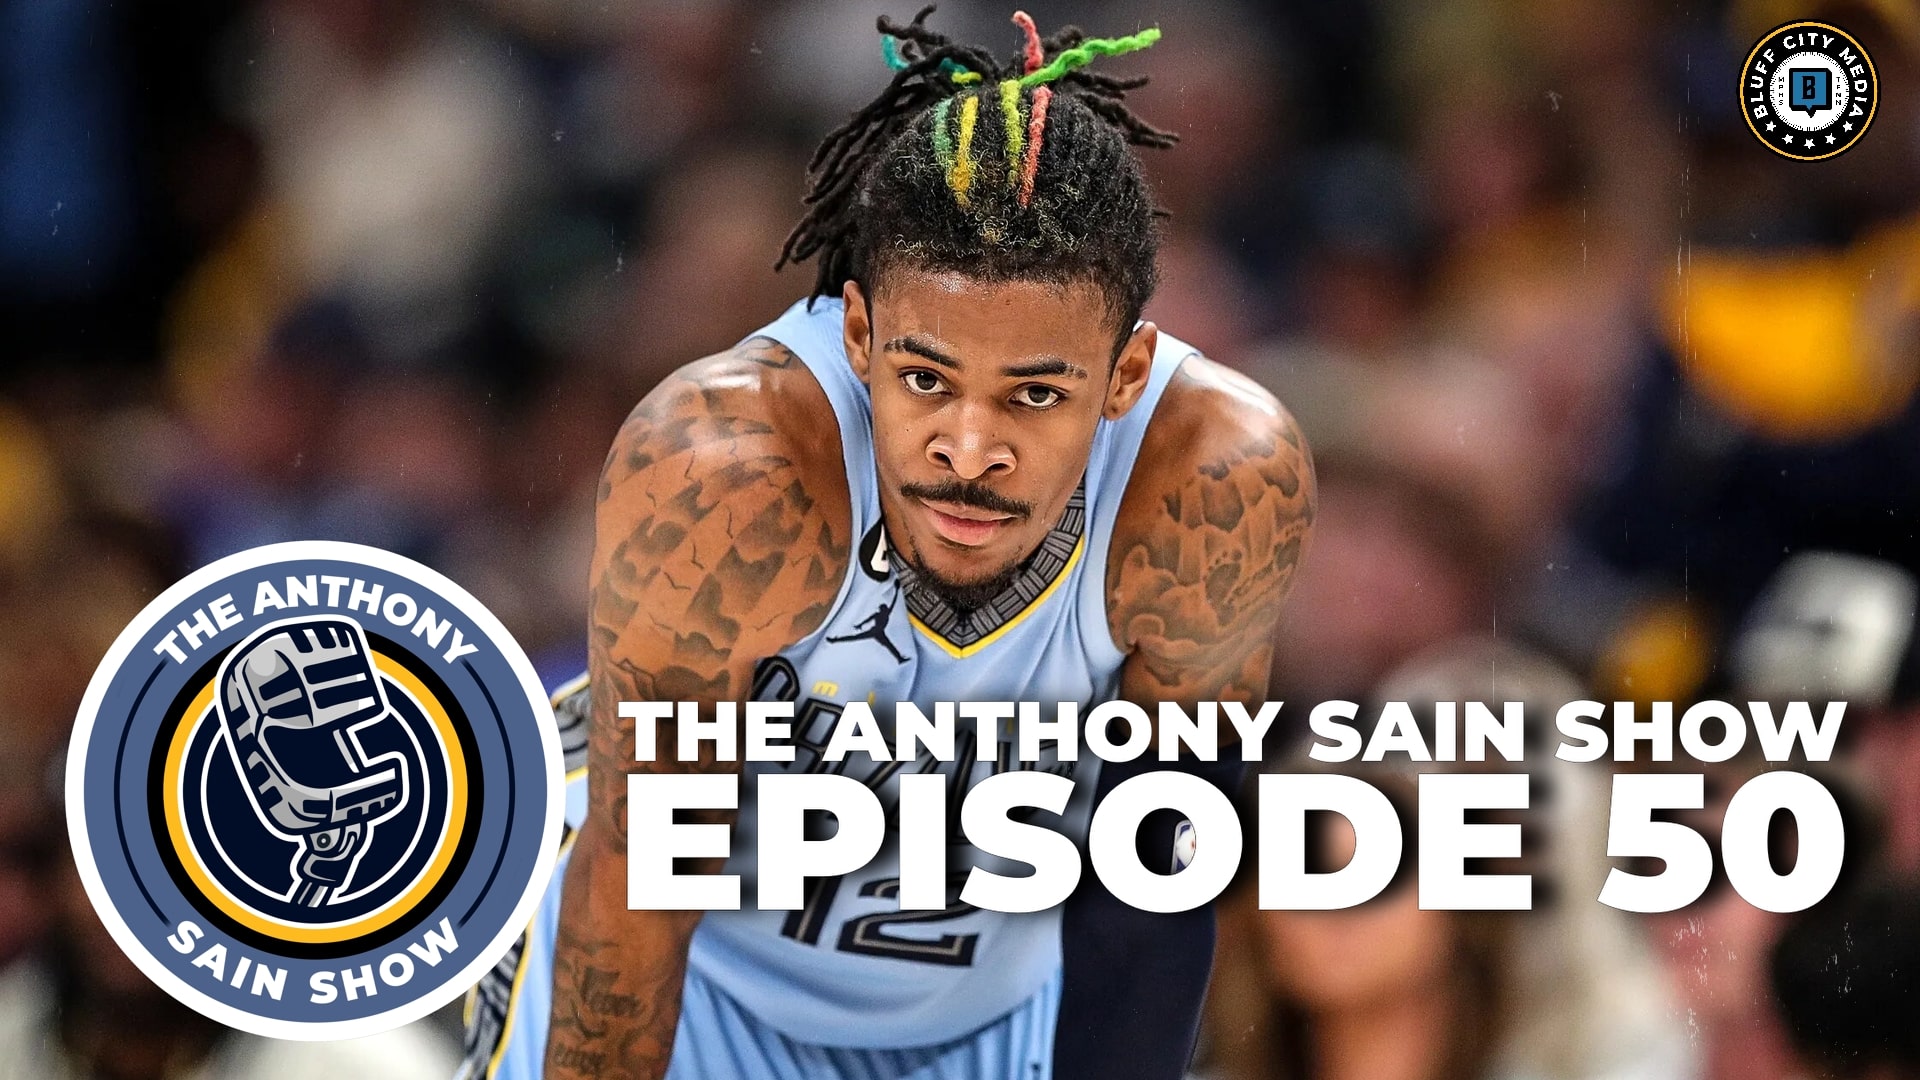 Memphis Grizzlies’ Front Office Moves, Tigers’ Loss to Ole Miss, and NBA In-Season Tournament | Anthony Sain Show Ep. 50